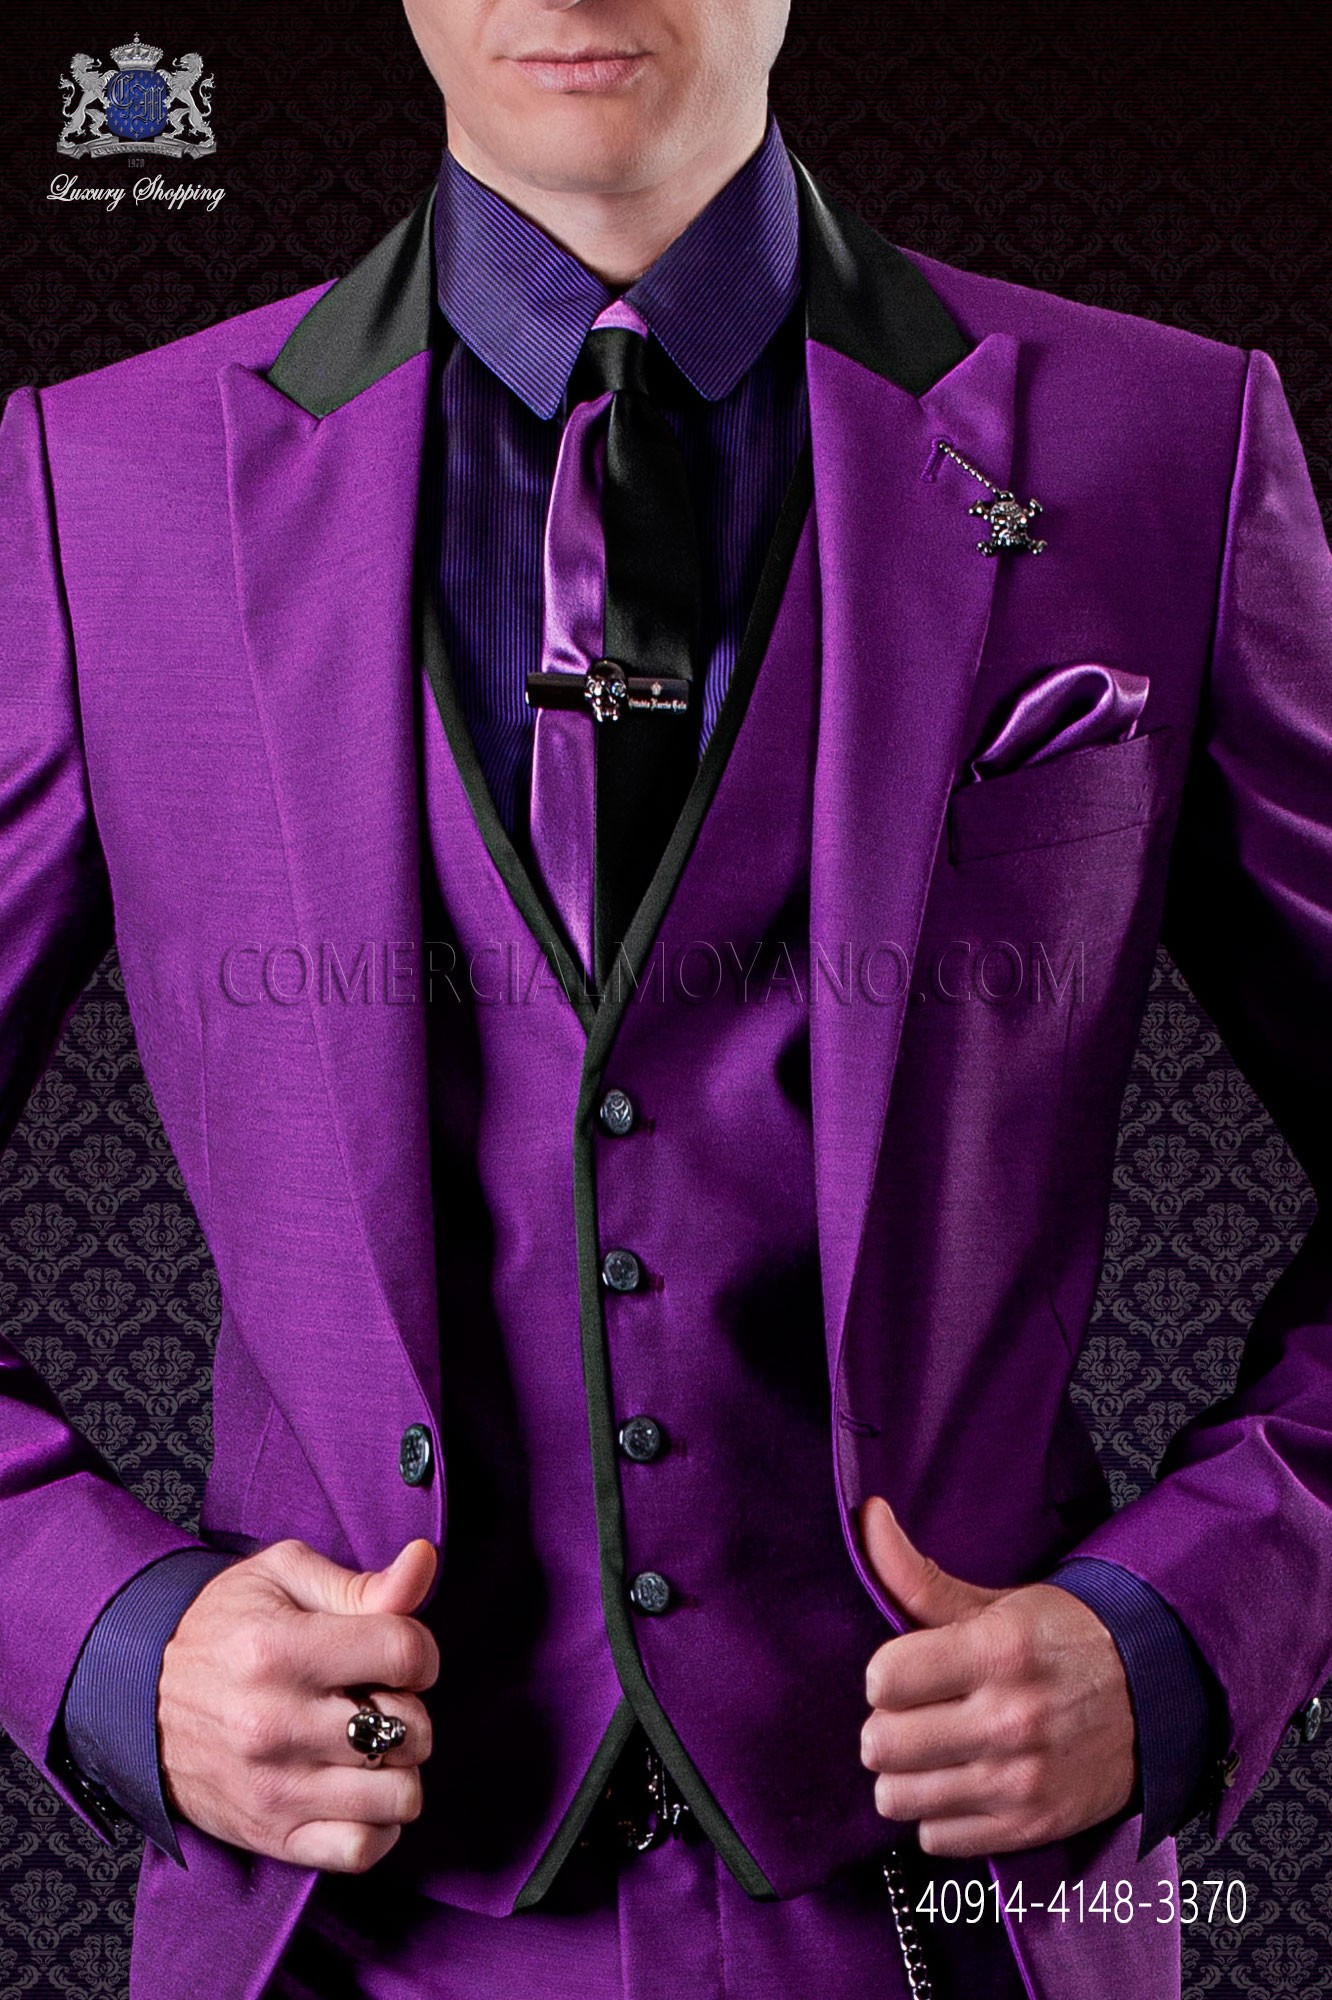 Navy Blazer with Purple Dress Shirt Getty Images)Because none of the four c...